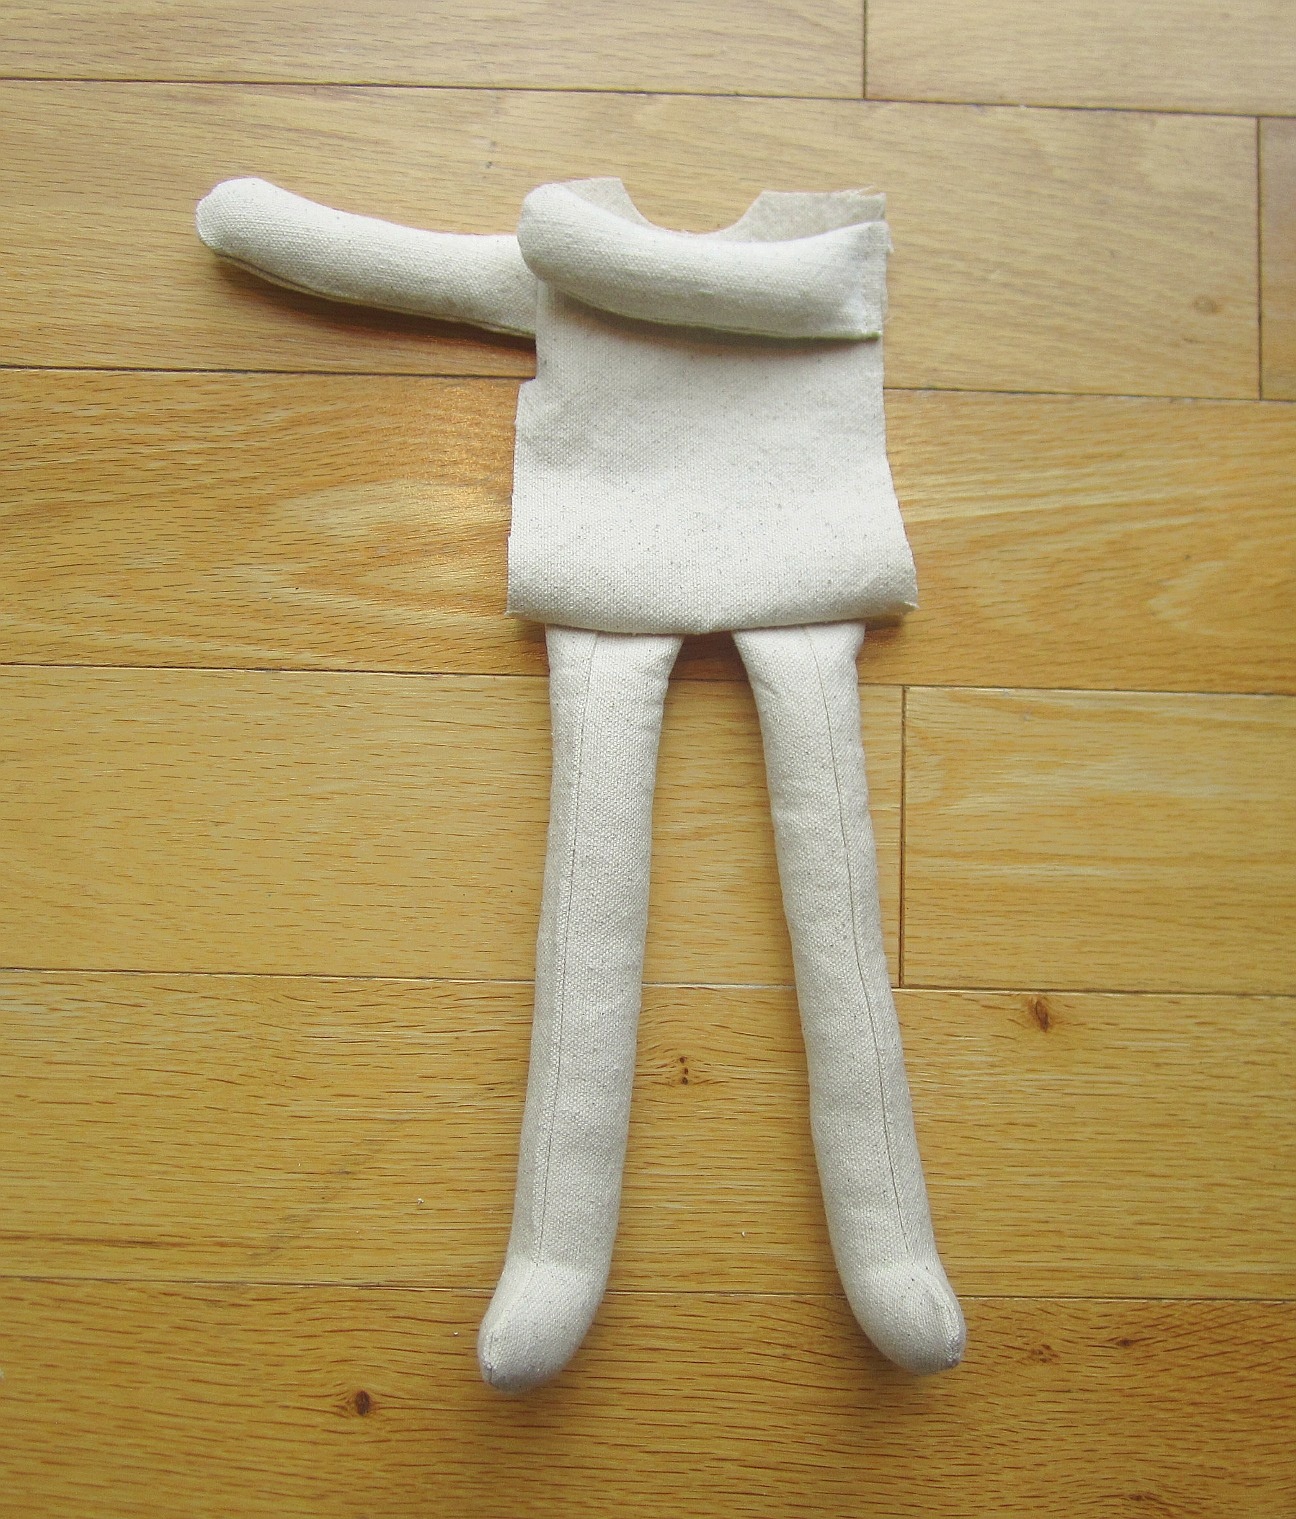 Rag Doll Free Sewing Pattern And Instructions – Amie Scott - Free Printable Rag Doll Patterns